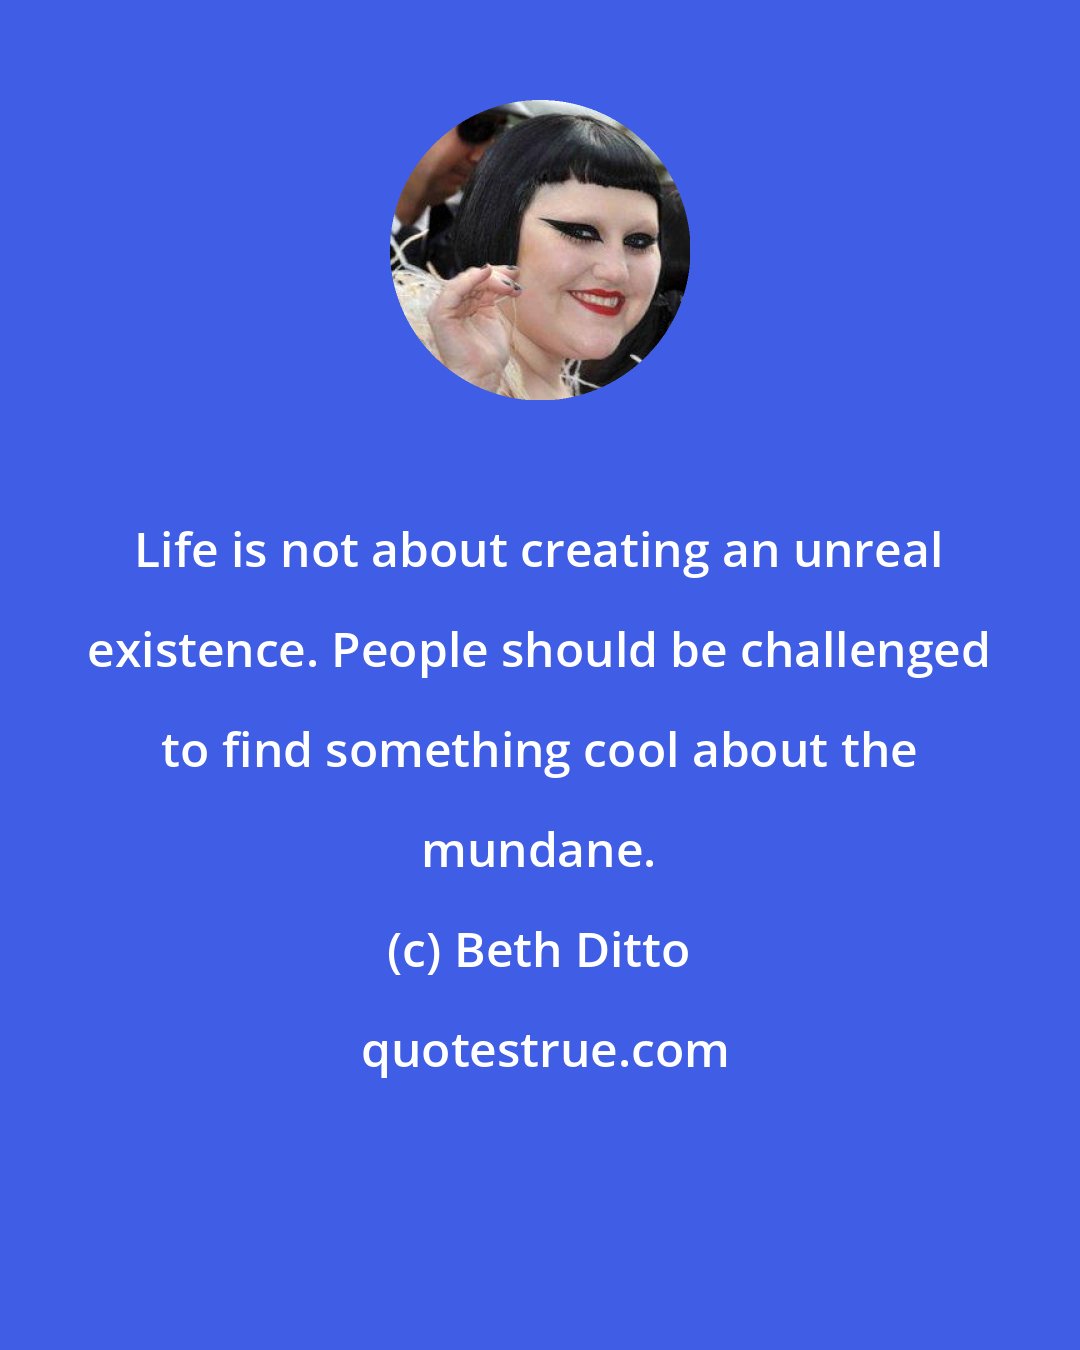 Beth Ditto: Life is not about creating an unreal existence. People should be challenged to find something cool about the mundane.